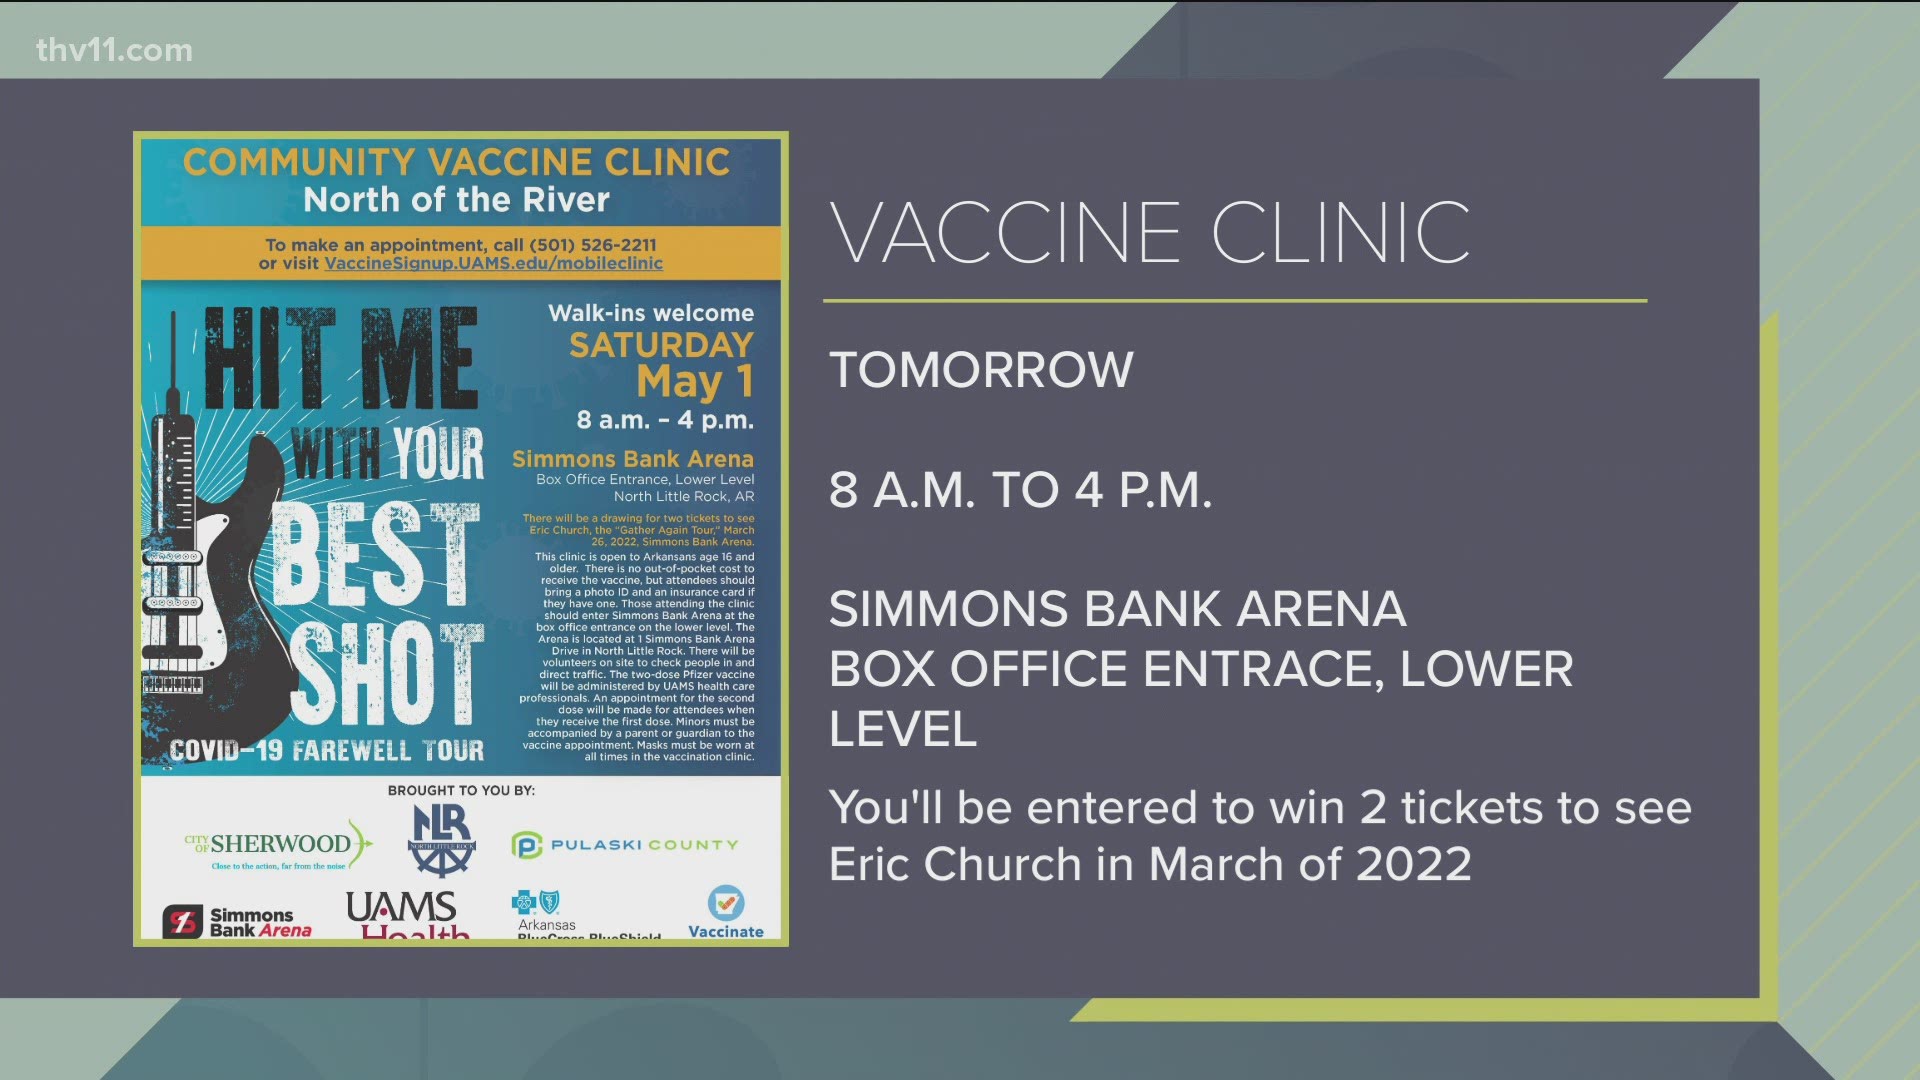 On Saturday, May 1, people who stop by and get their COVID-19 vaccine at Simmons Bank Arena can enter their name in a drawing for two Eric Church tickets.